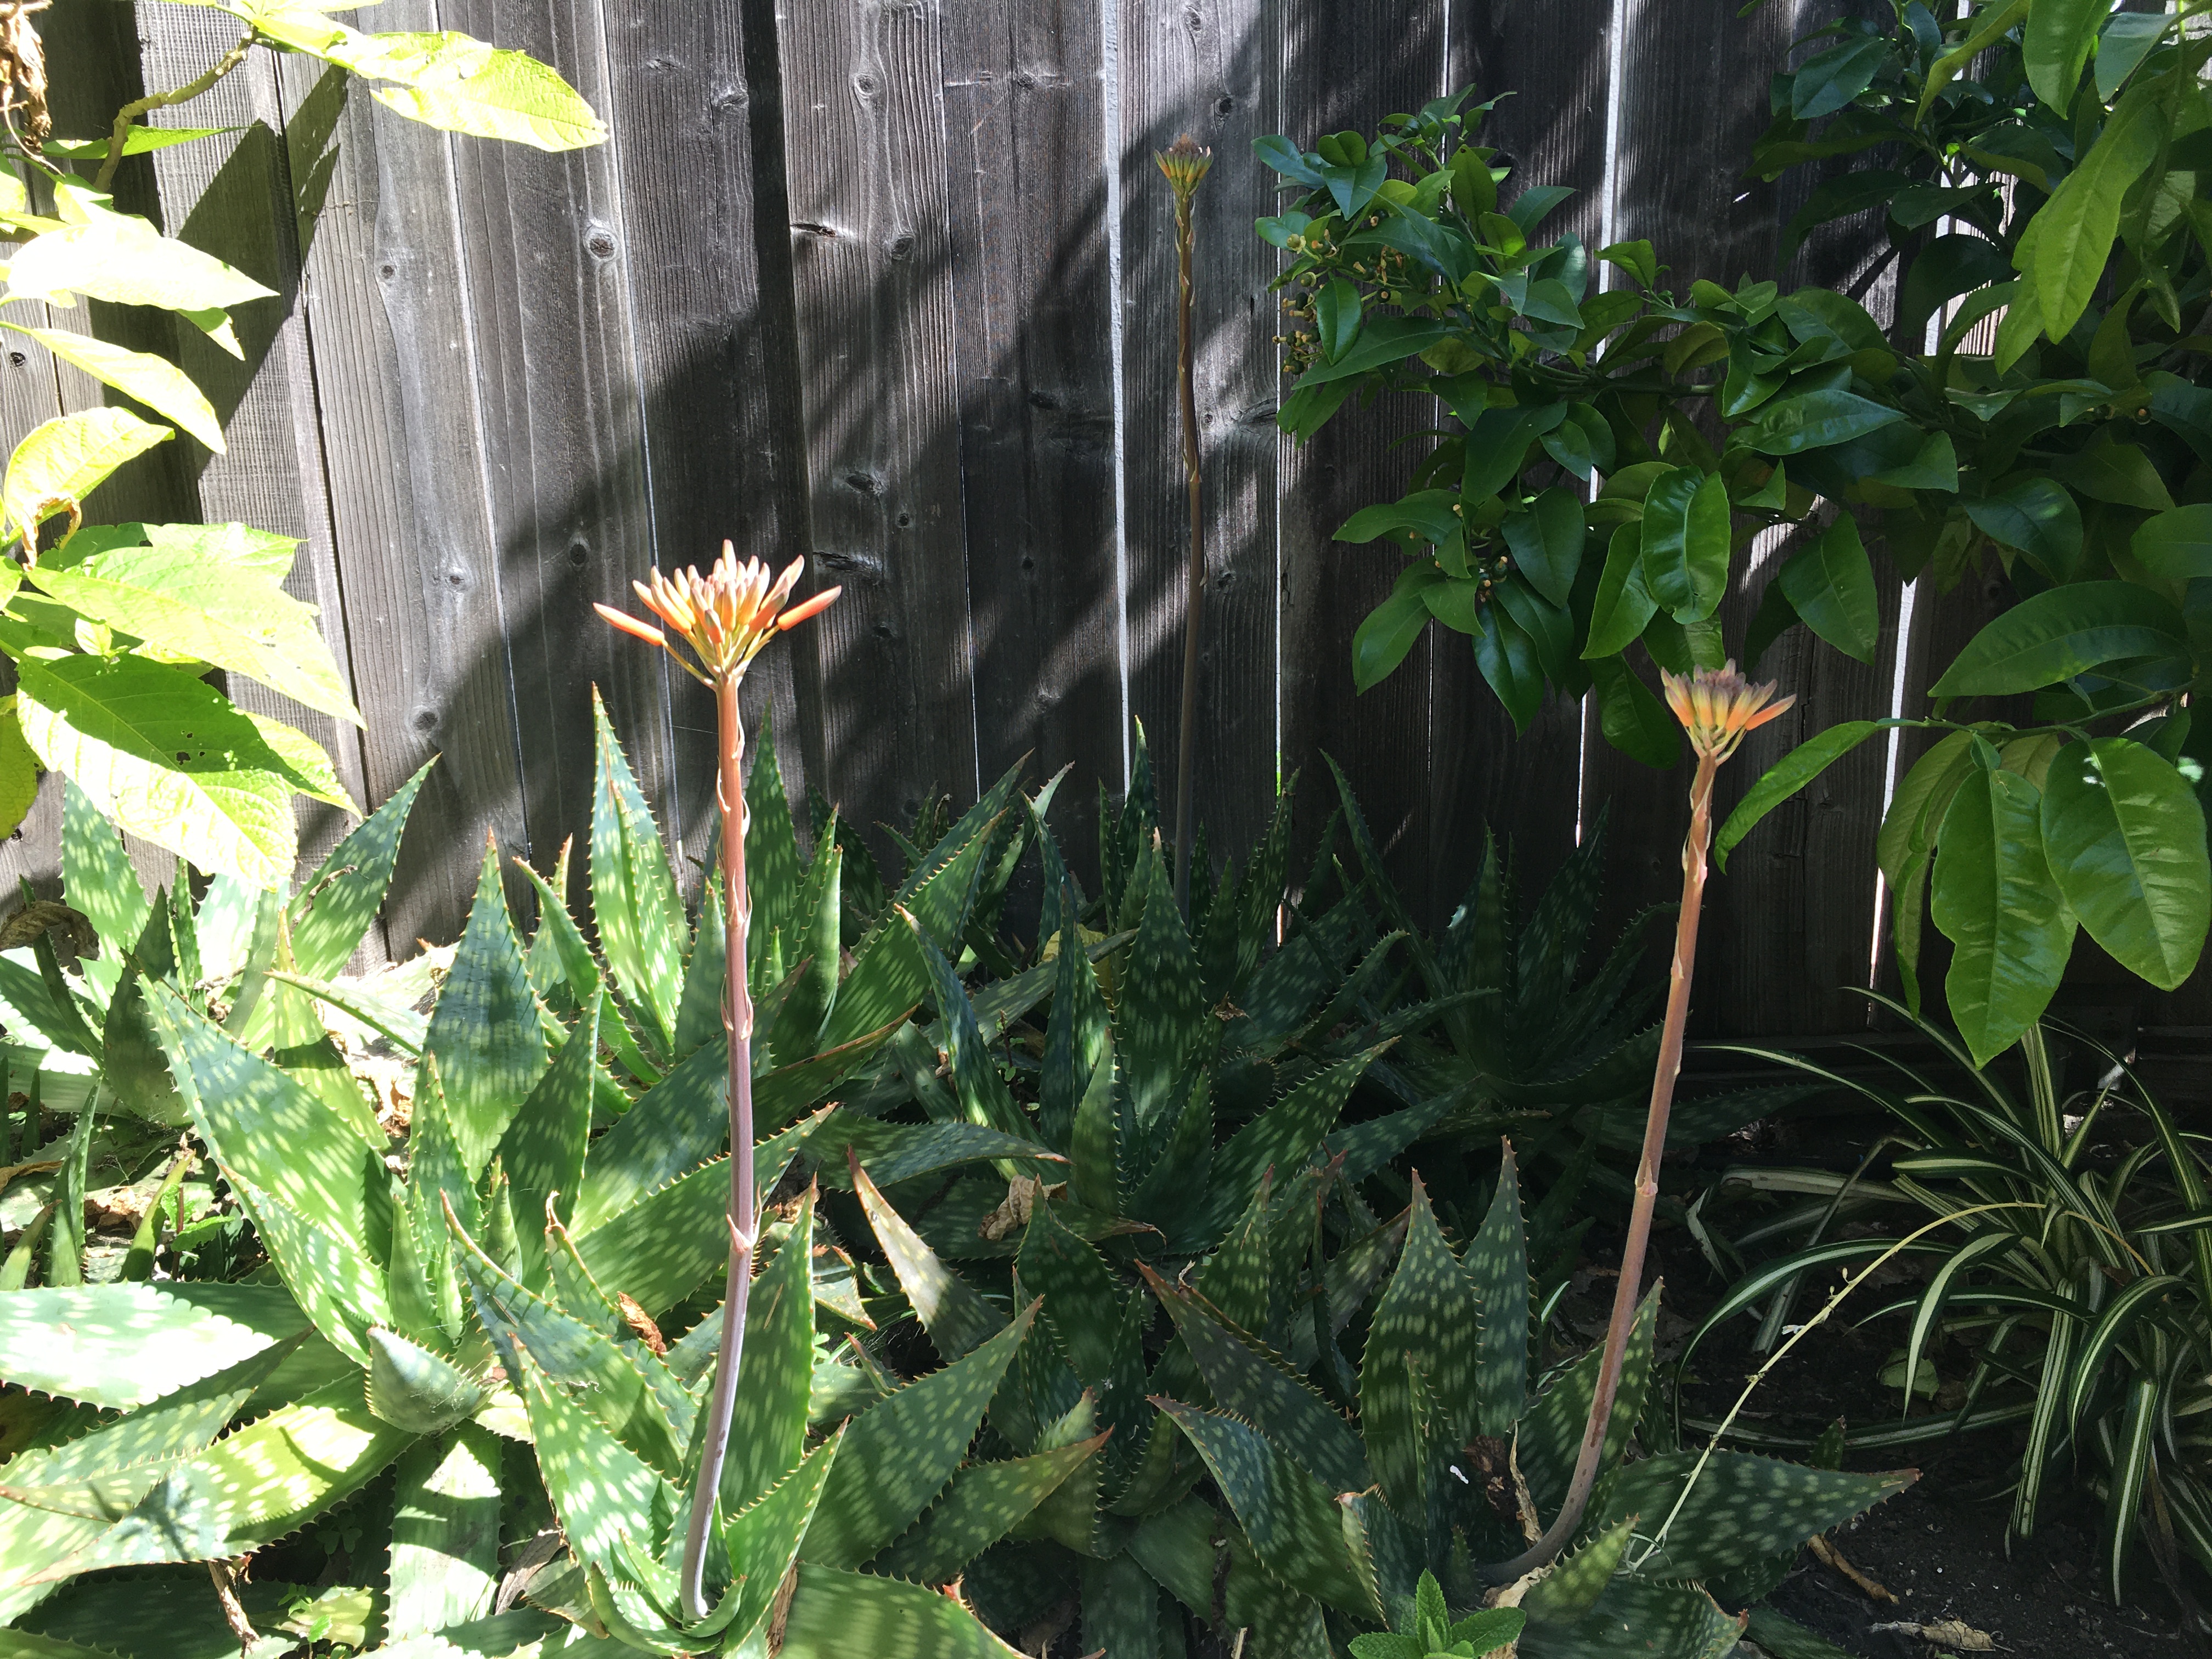 Photos of an aloe patch, with two stalks of orange flowers about to bloom.